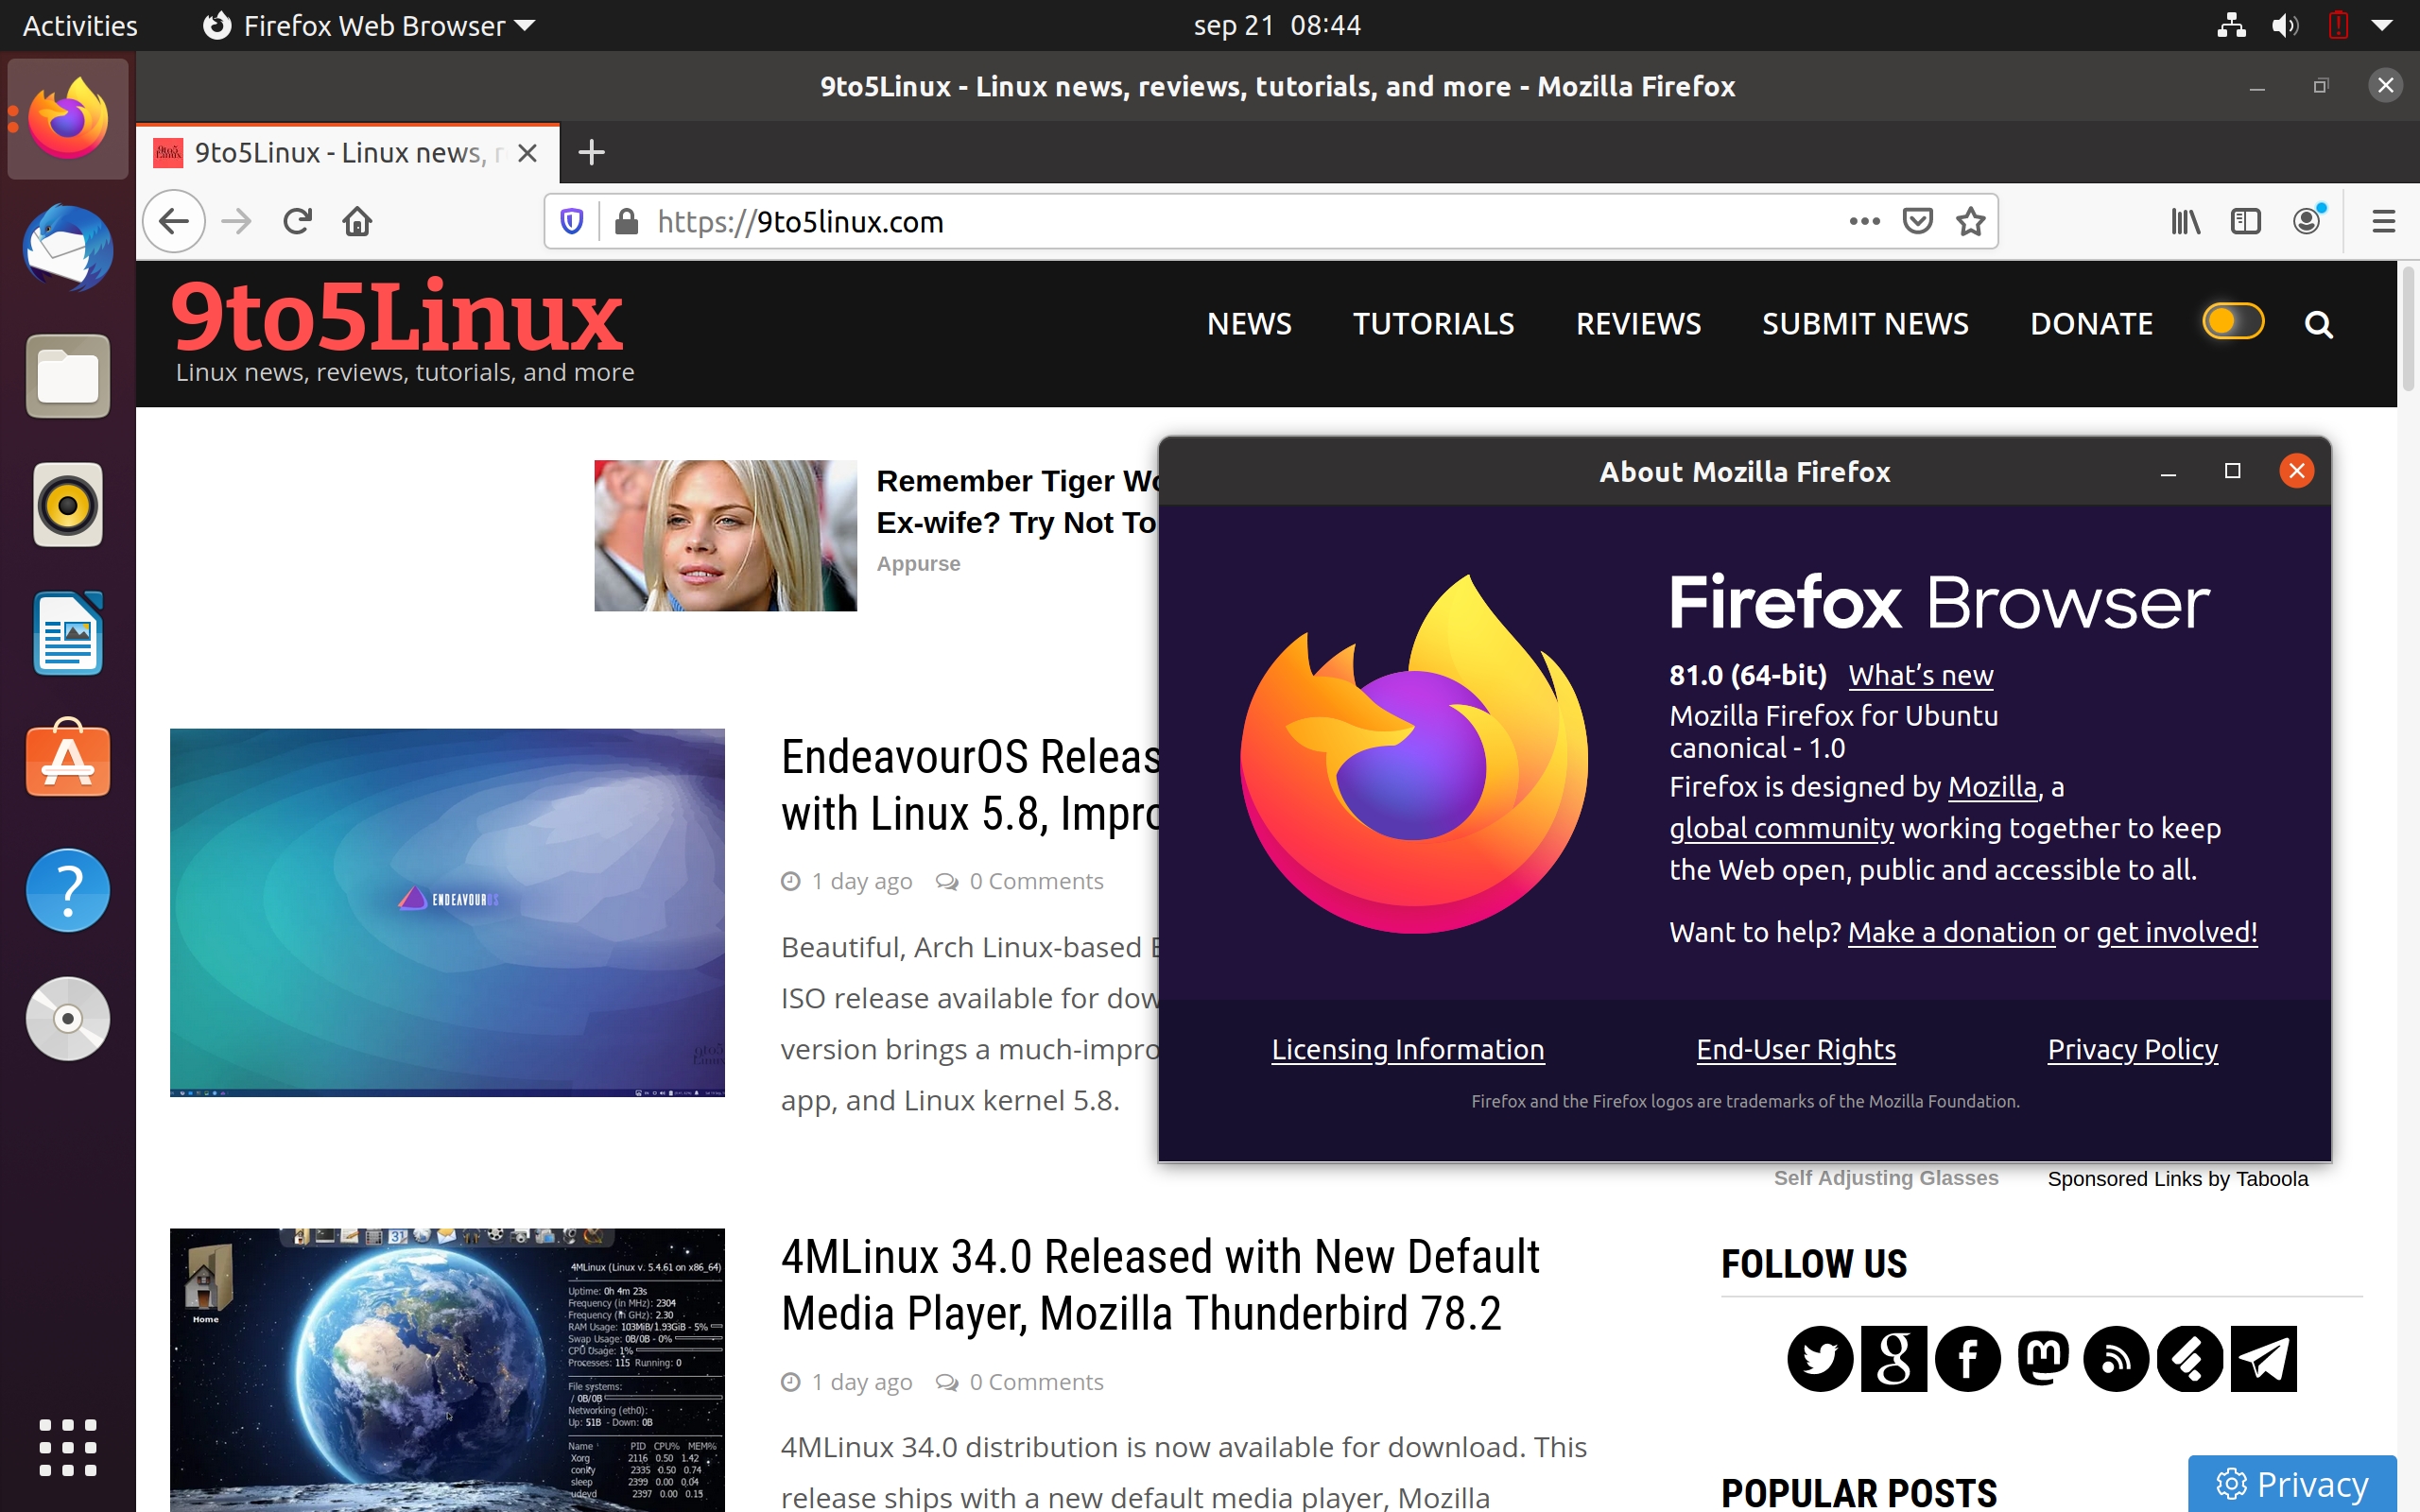 Firefox 81 Is Now Available for Download, Here’s What’s New